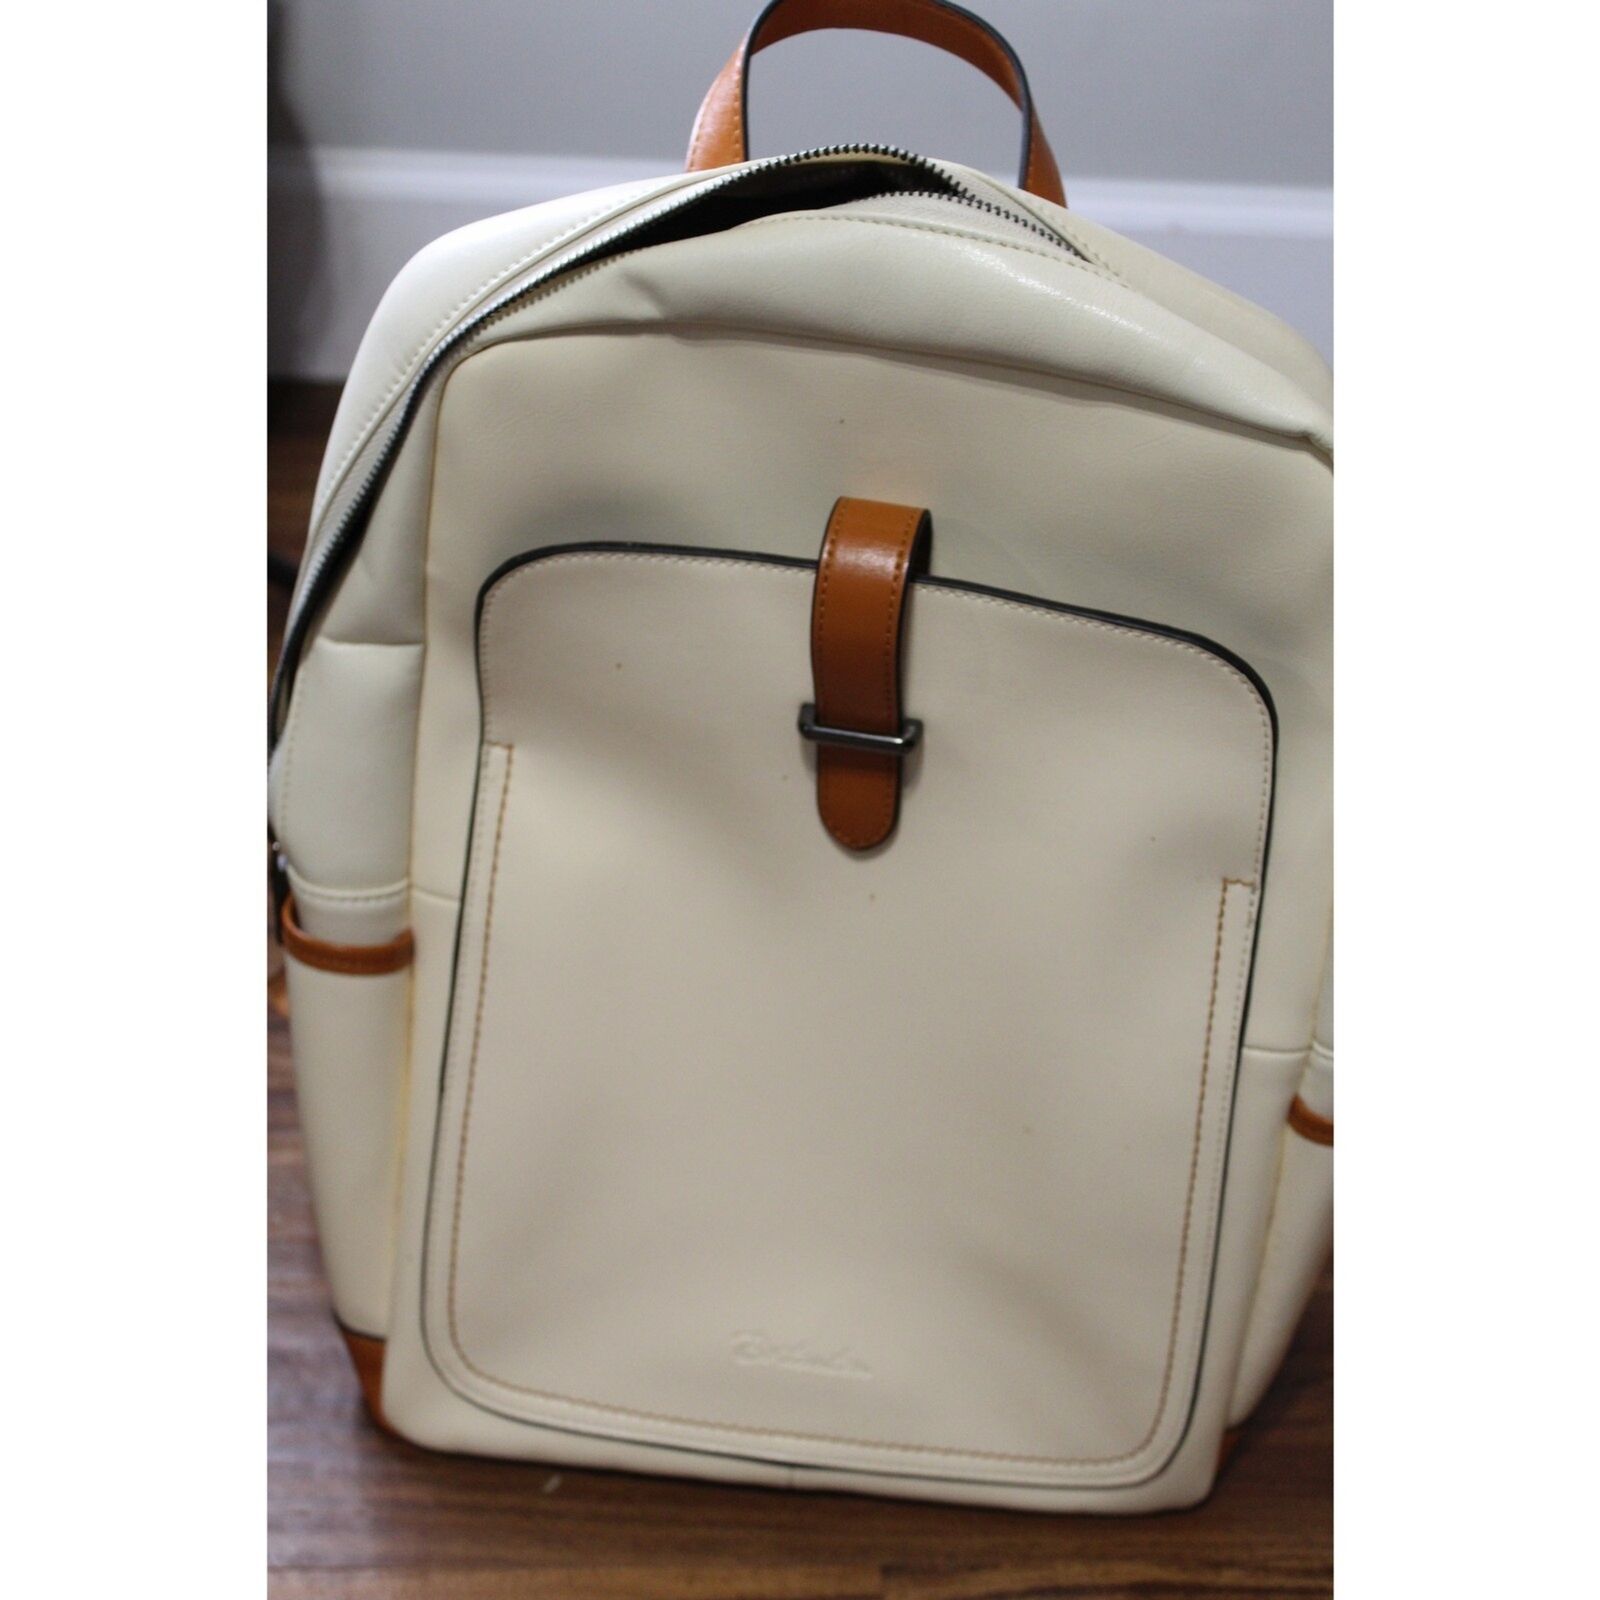 BOSTANTEN Cream Genuine Leather Backpack Purse Travel Bags for Women